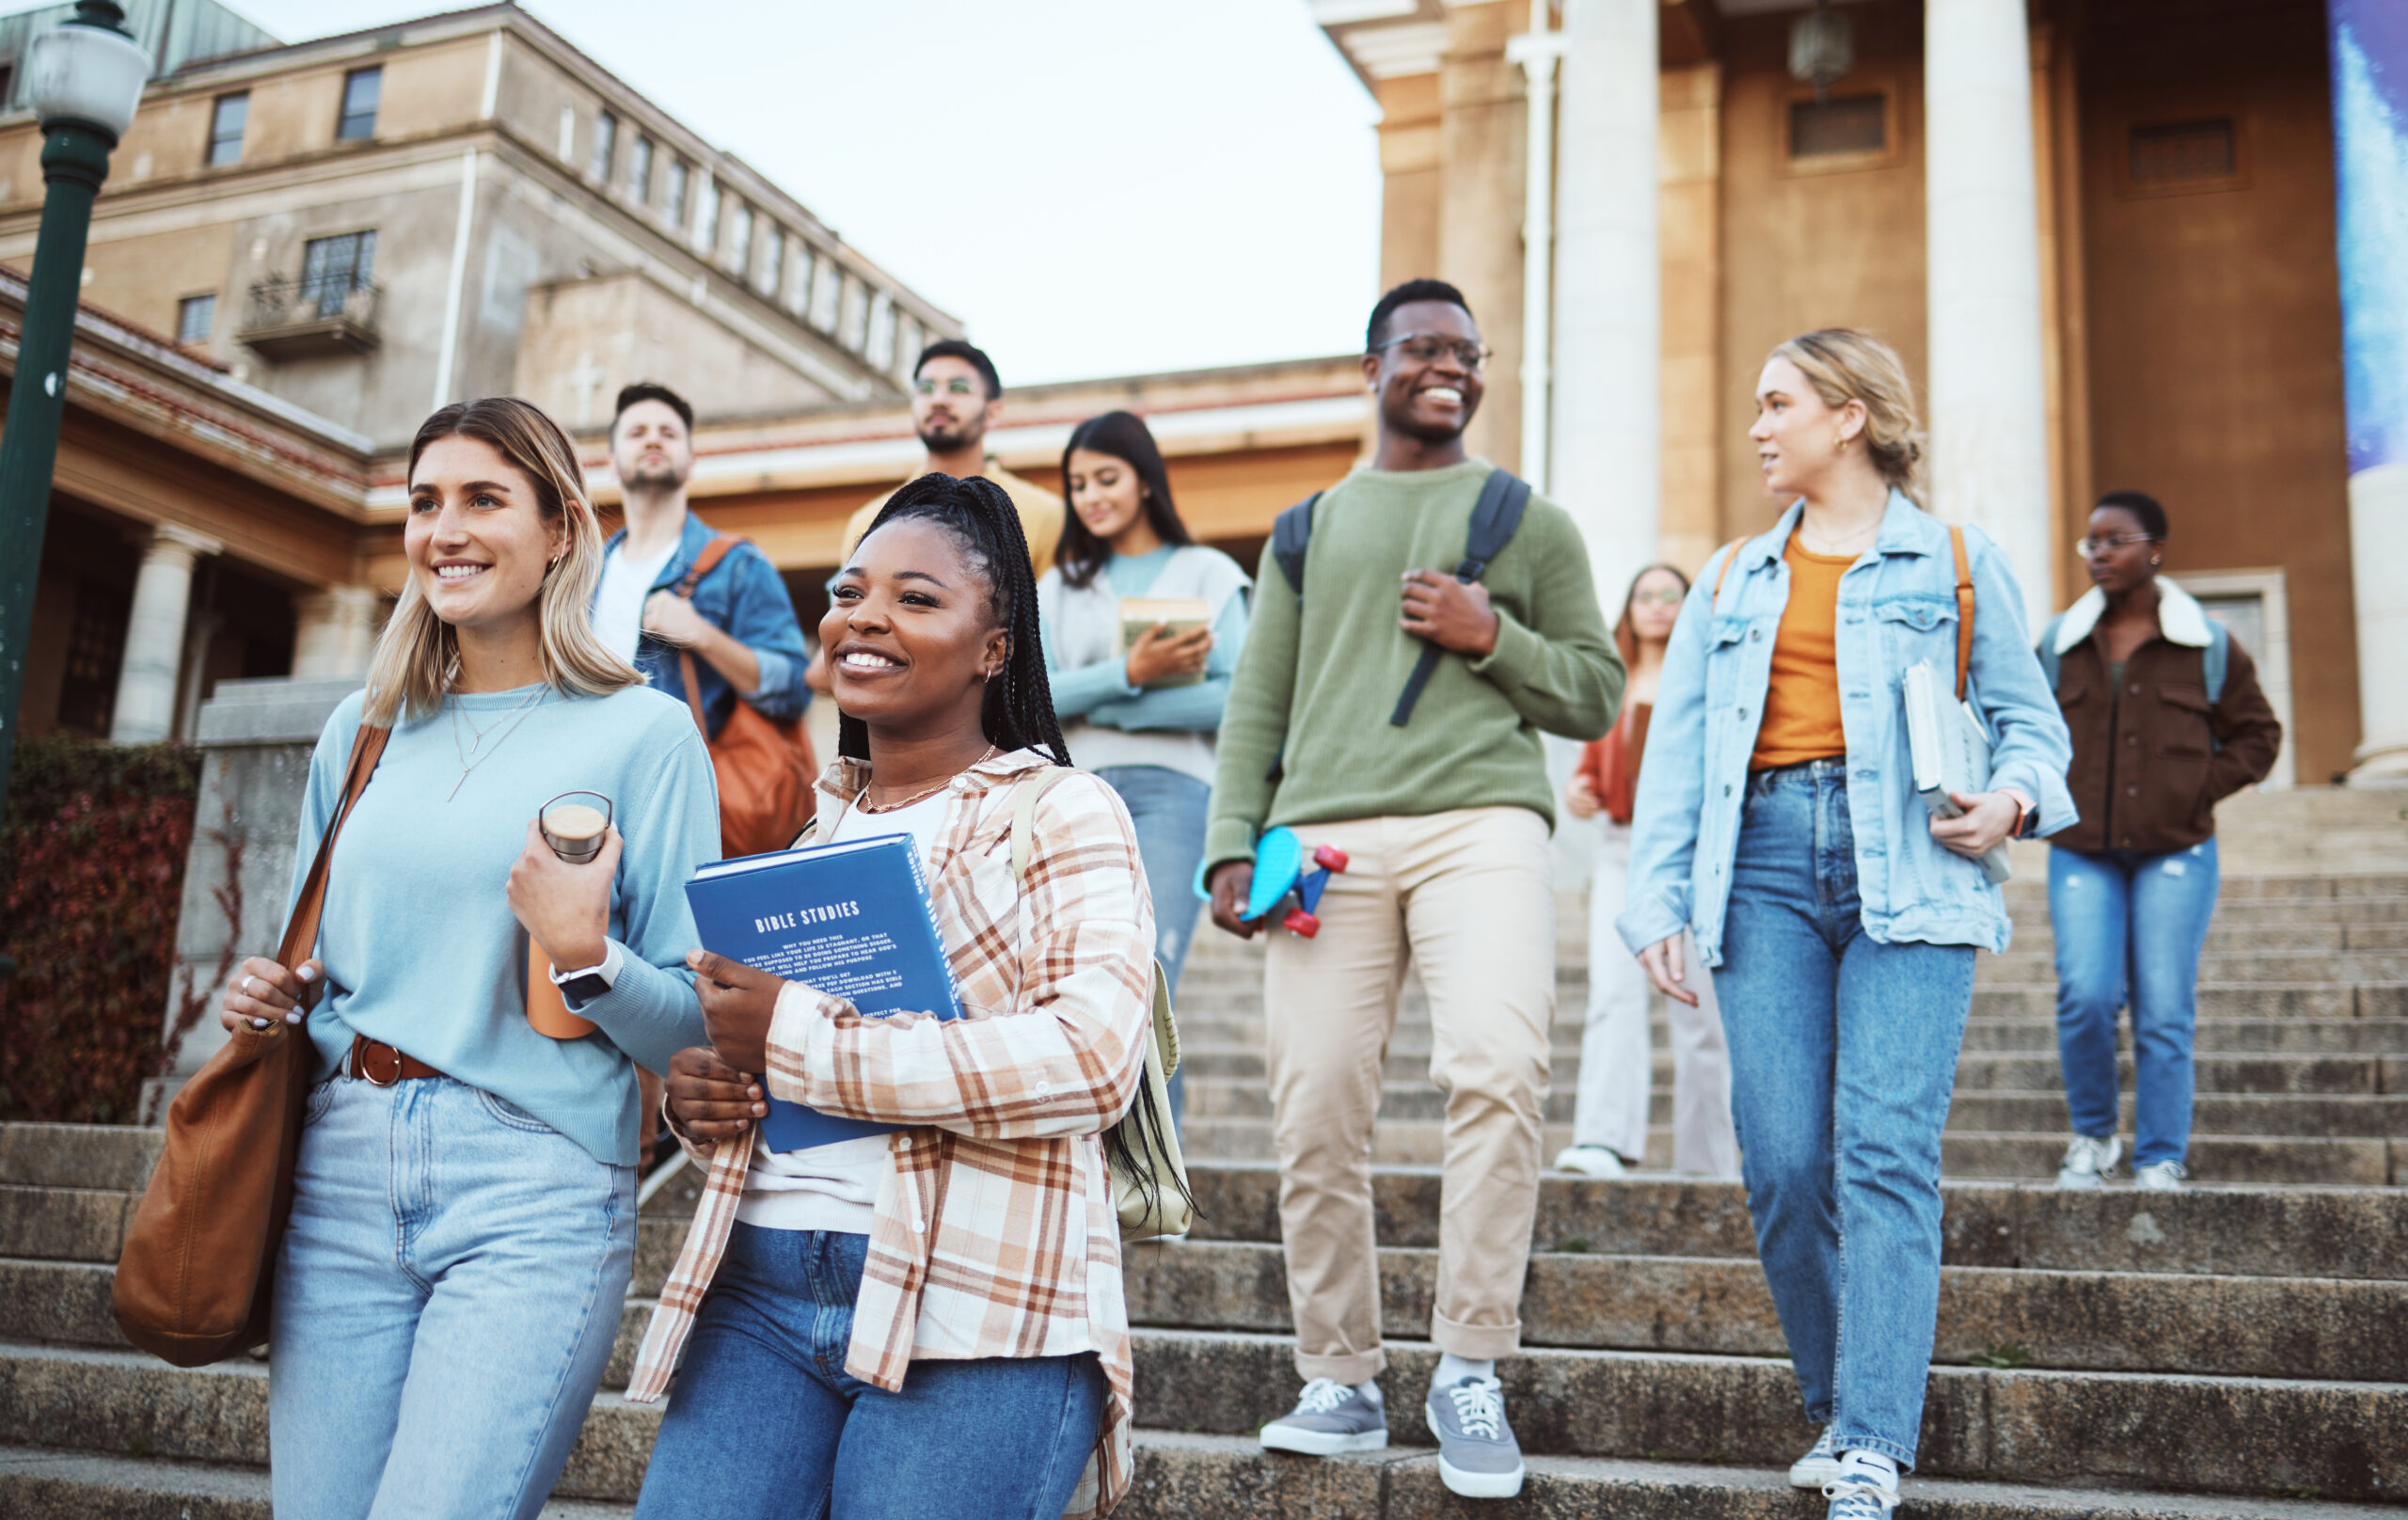 Diversity, students and walking on university steps, school stairs or college campus to morning class. Smile, happy people and bonding education friends in global scholarship opportunity or open day.